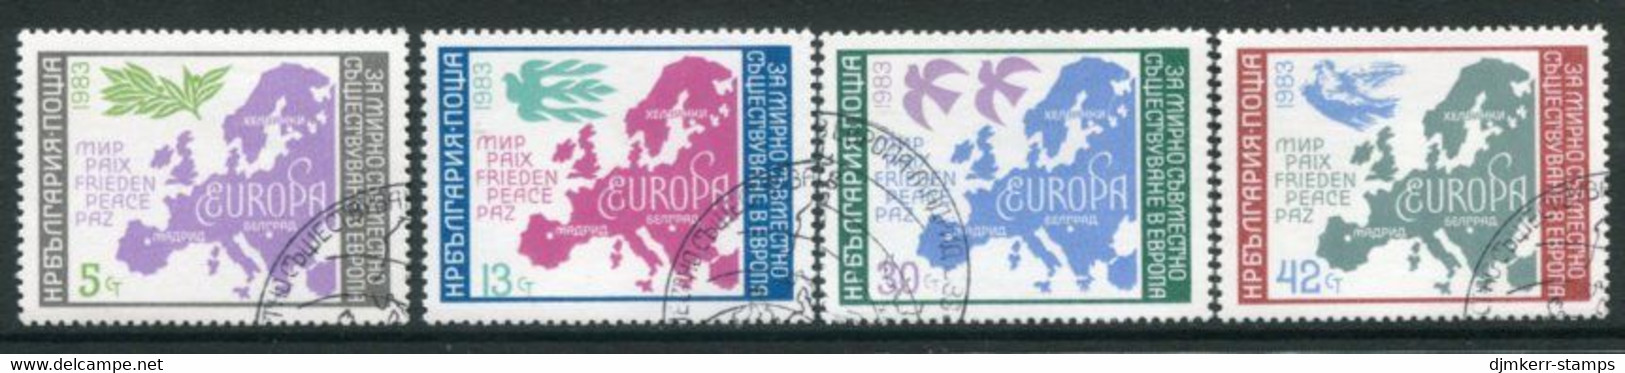 BULGARIA 1983  European Security Conference Used.  Michel 3218-21 - Gebraucht